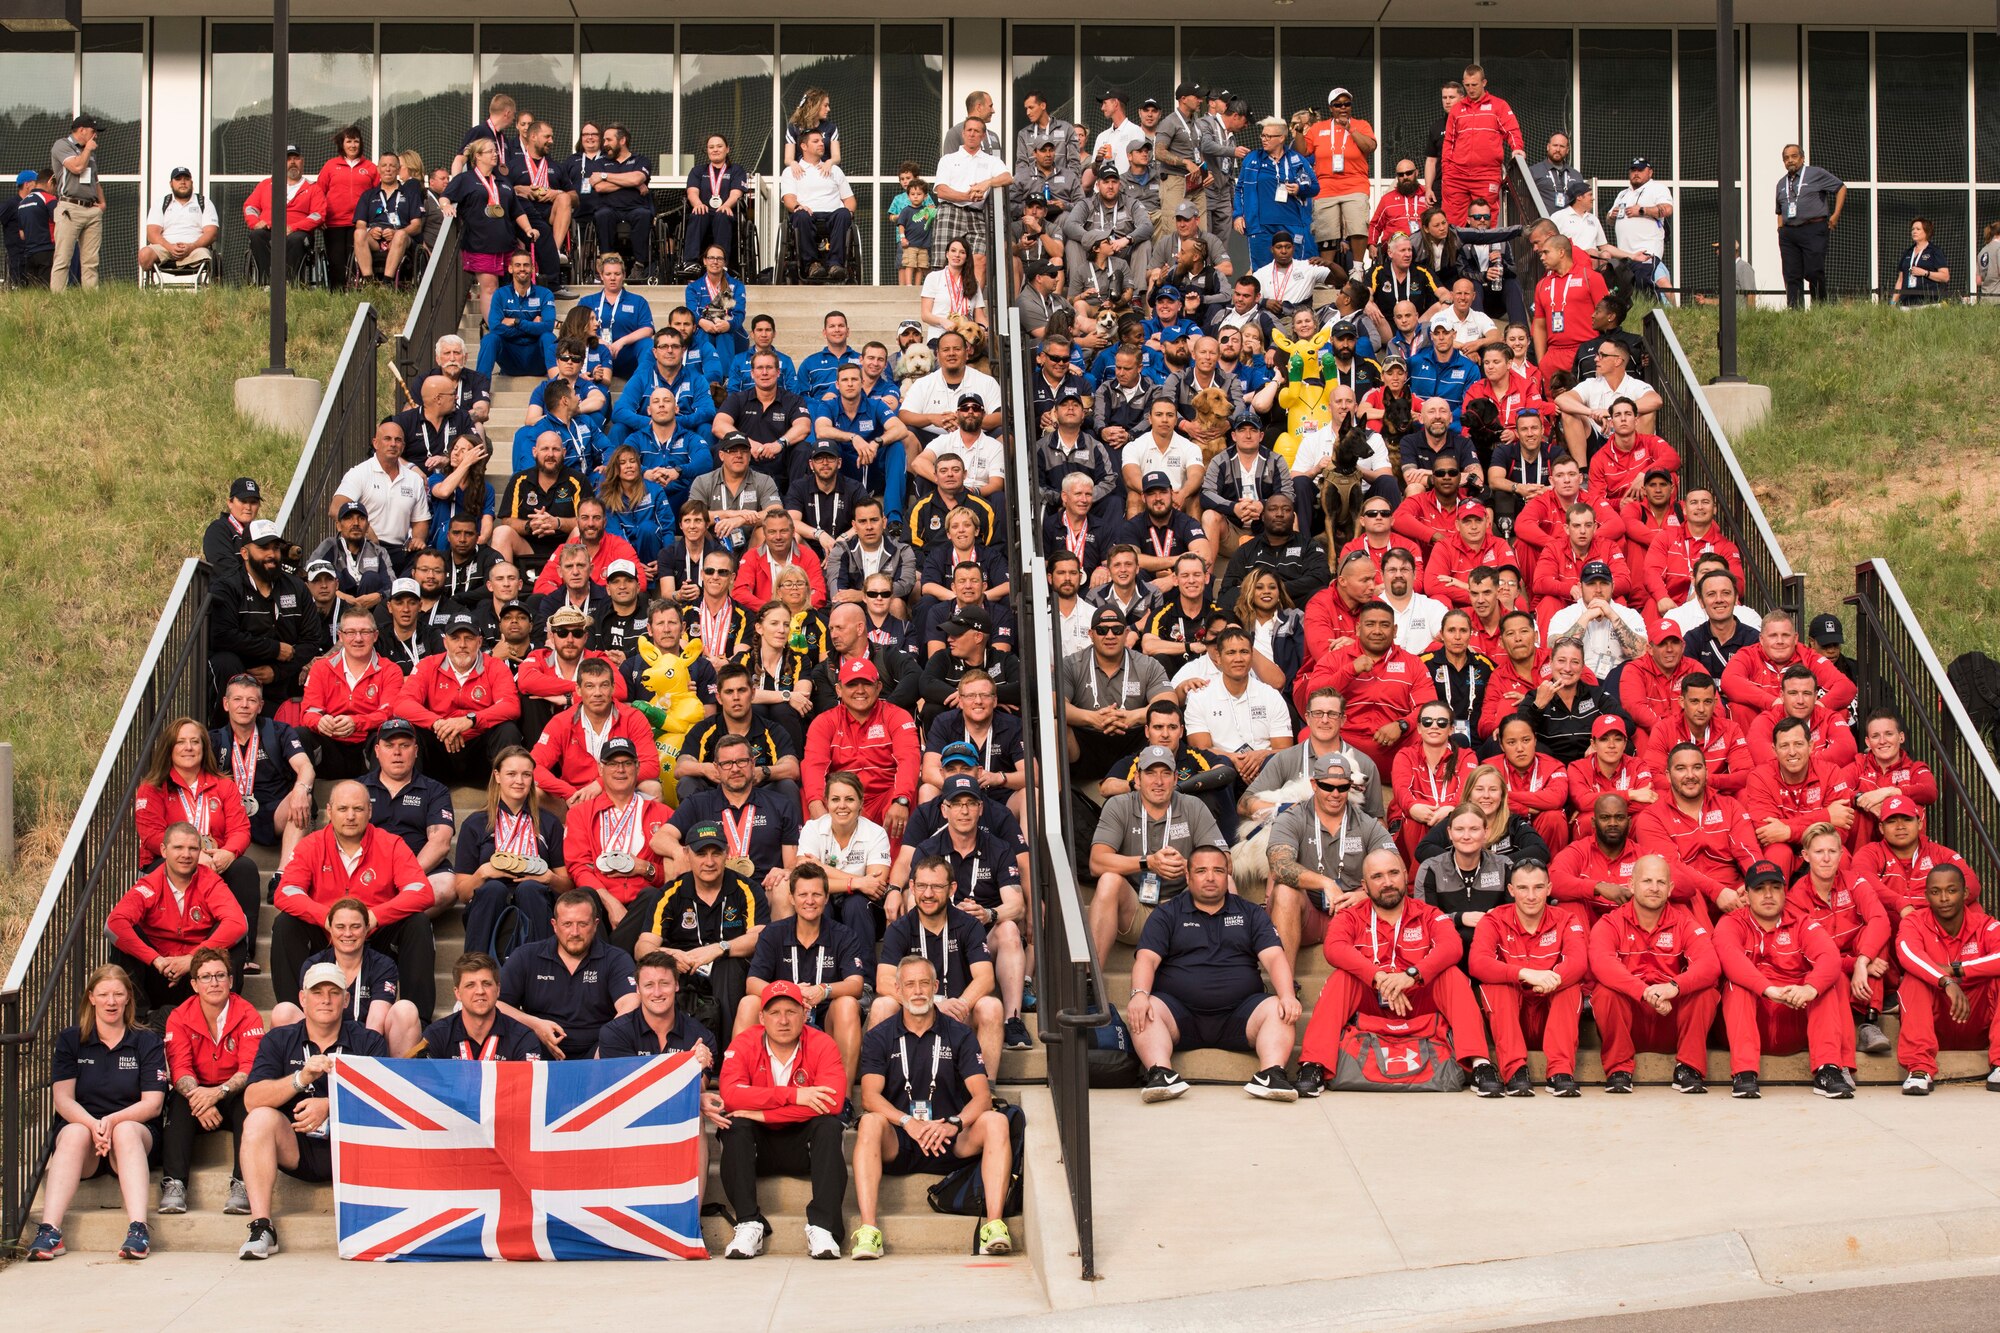 Athletes and staff pose for a team photo at the conclusion of the 2018 DoD Warrior Games at the U.S. Air Force Academy in Colorado Springs, Colo. on June 9, 2018. The Warrior Games are an annual event, established in 2010, to introduce wounded, ill and injured service members to adaptive sports as a way to enhance their recovery and rehabilitation. (DoD Photo by Roger L. Wollenberg)